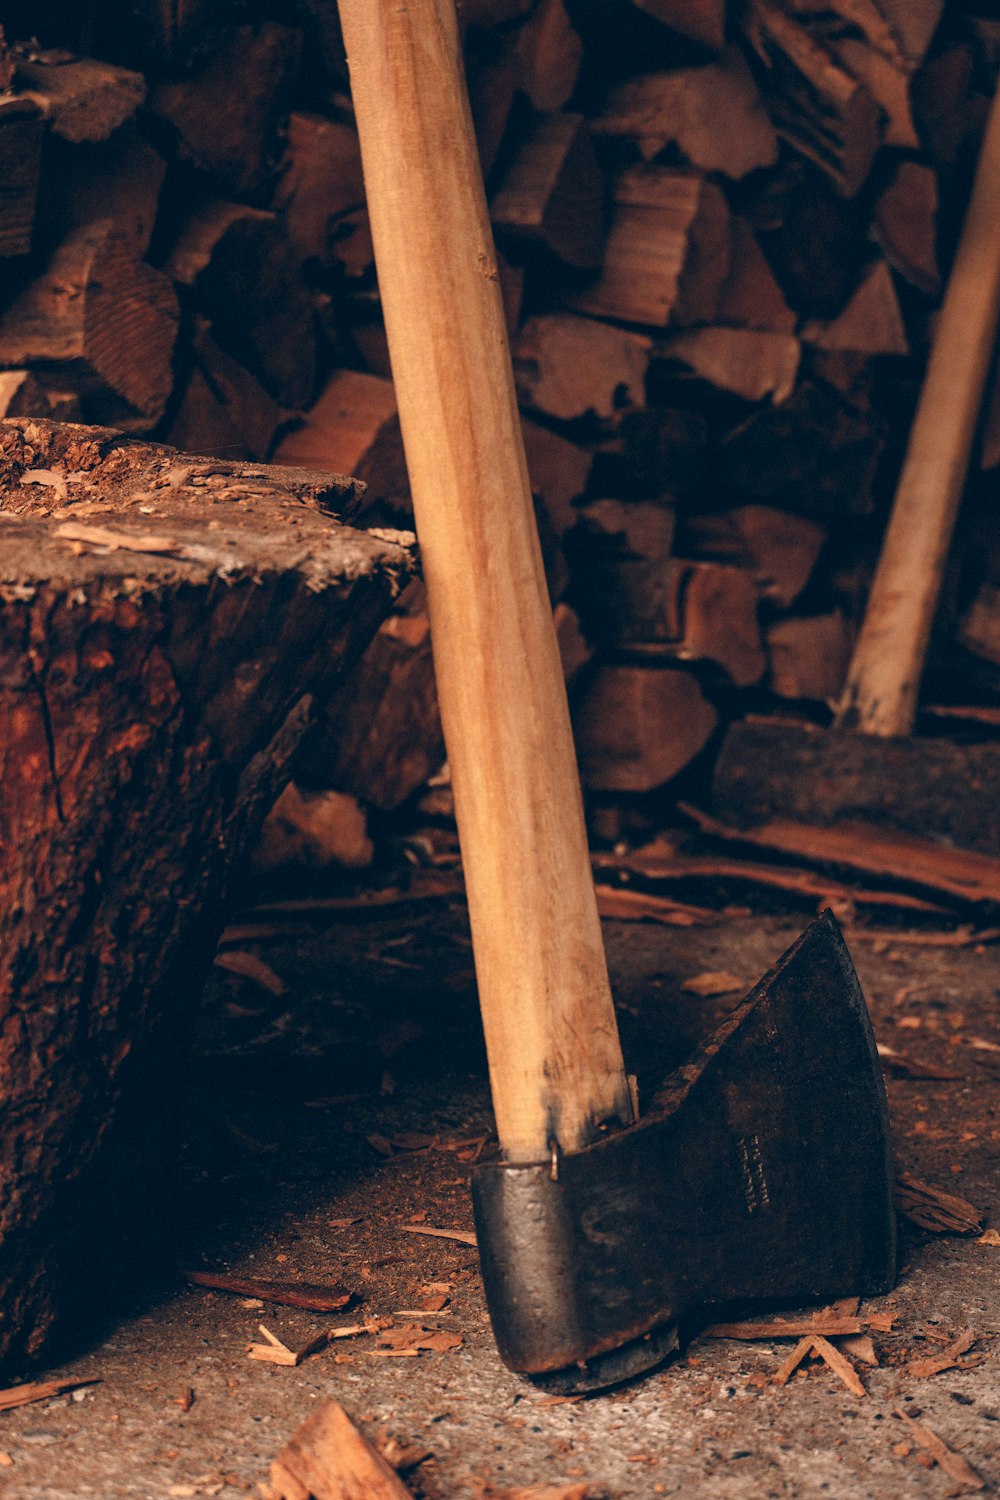 a hammer and an old axe in front of a pile of wood